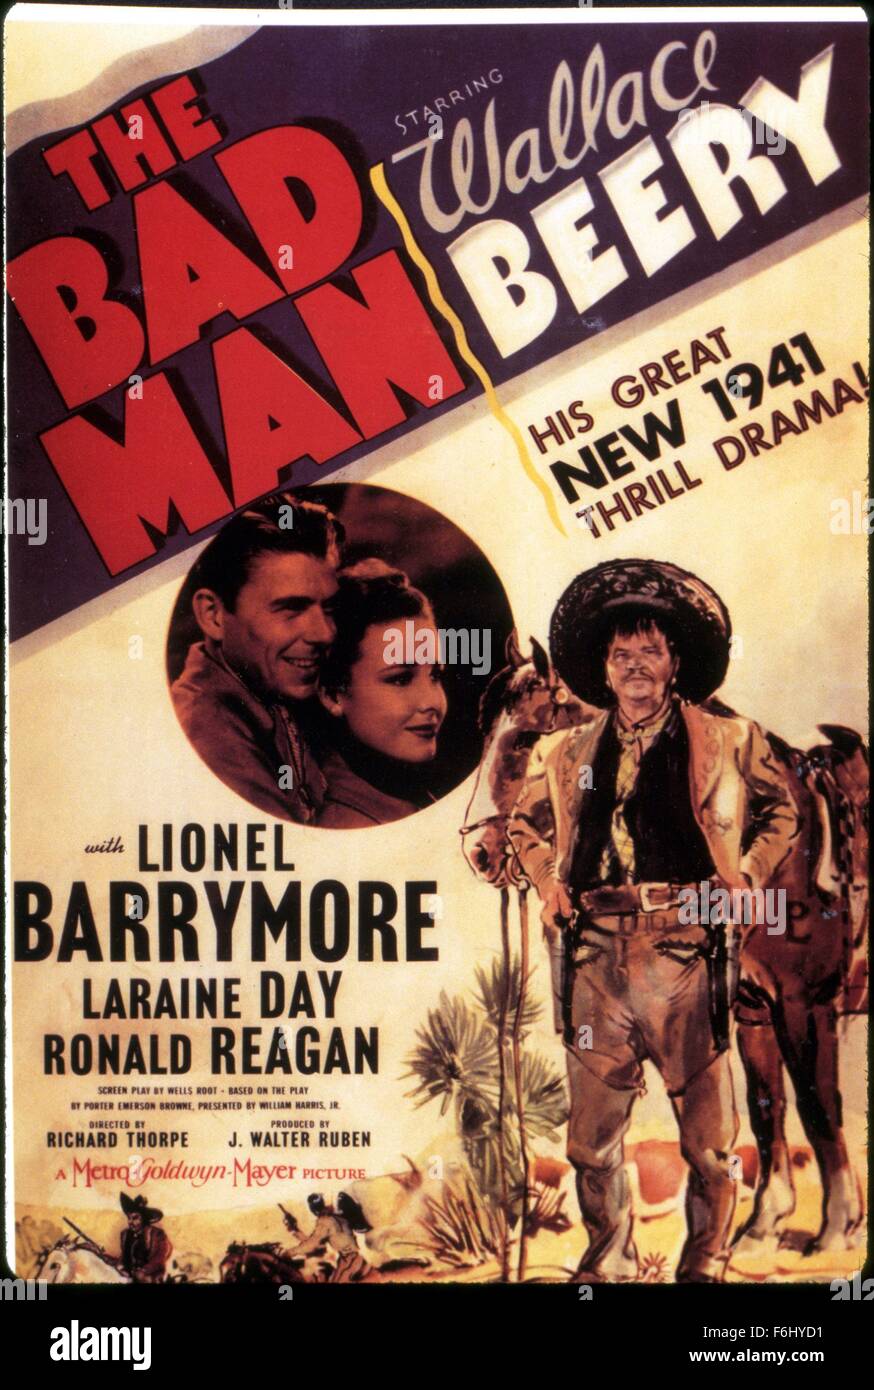 1941, Film Title: BAD MAN, Director: RICHARD THORPE, Studio: MGM, Pictured: WALLACE BEERY, RONALD REAGAN, COWBOY, MEXICAN, SOMBRERO, POSTER ART. Stock Photo